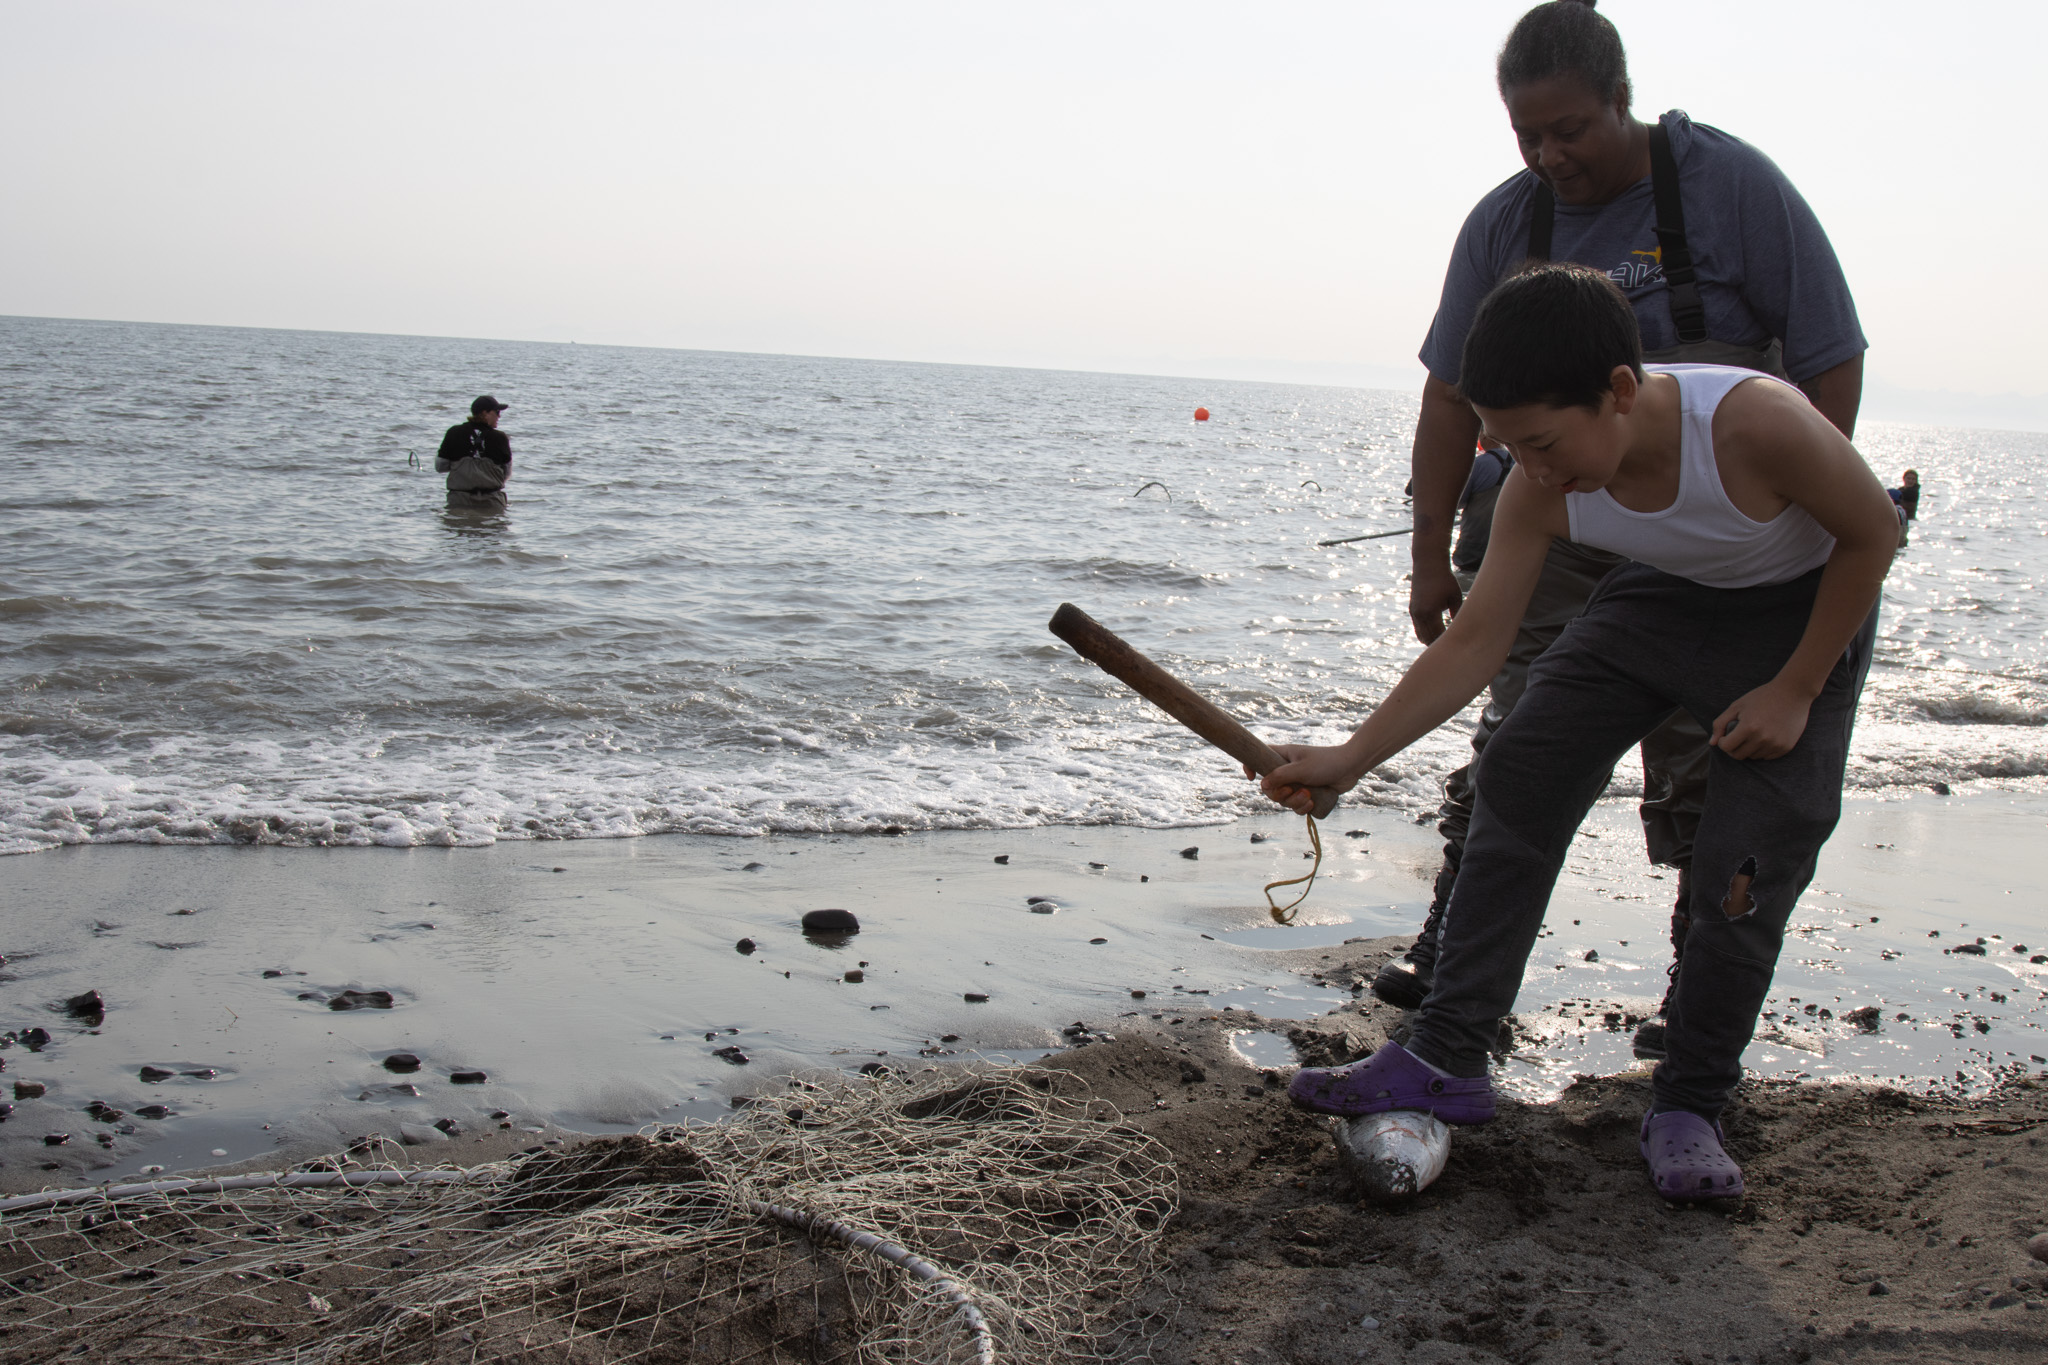 a woman stands behind a boy who is bent over with a small wooden club, about to hit a fish on the sand